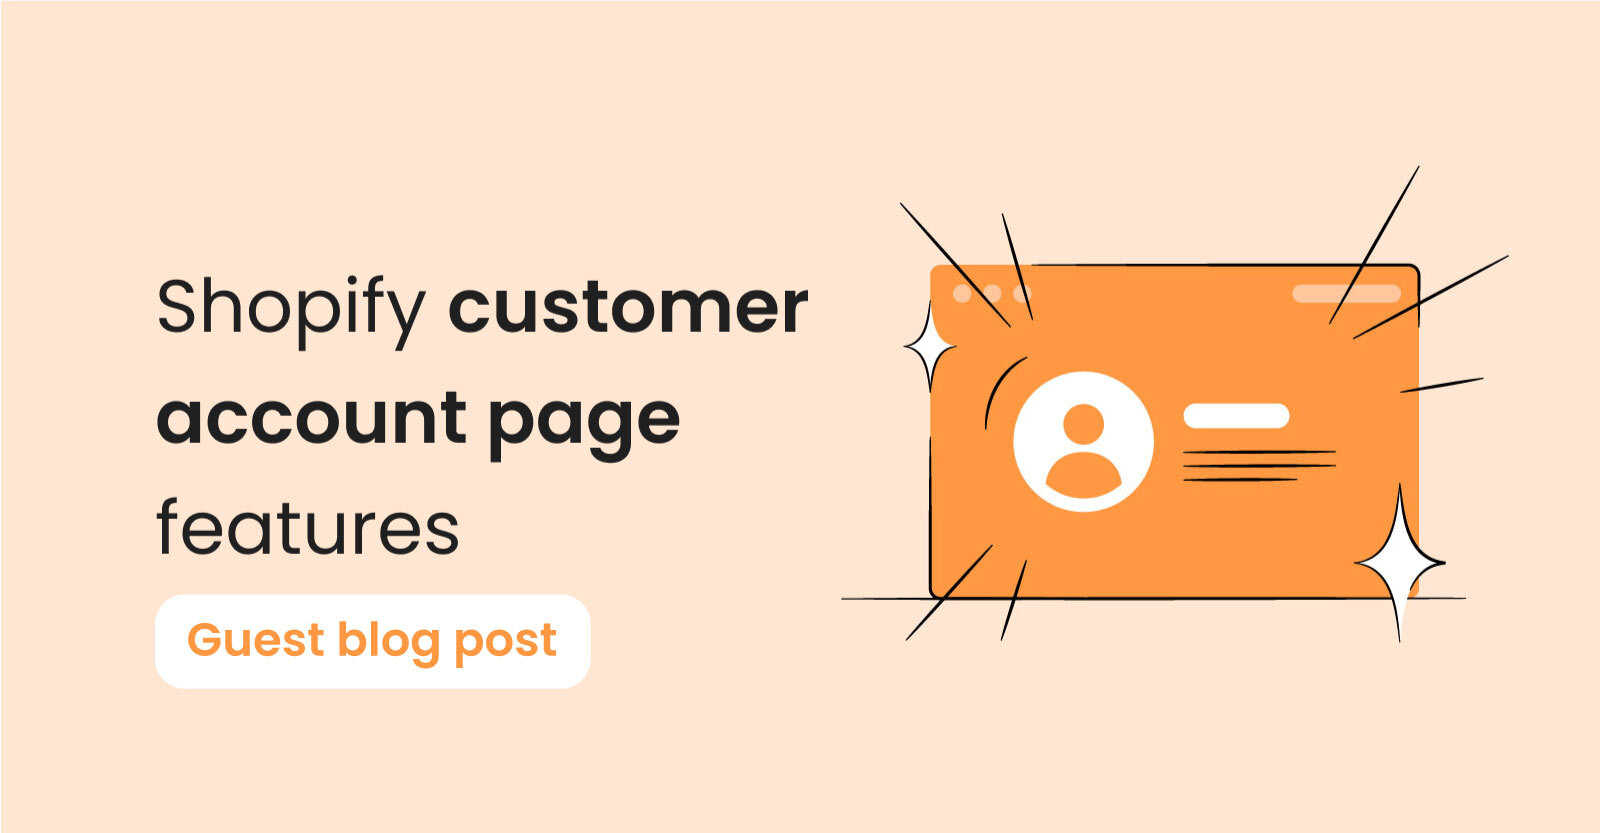 Shopify customer account page features that will impress your customers!